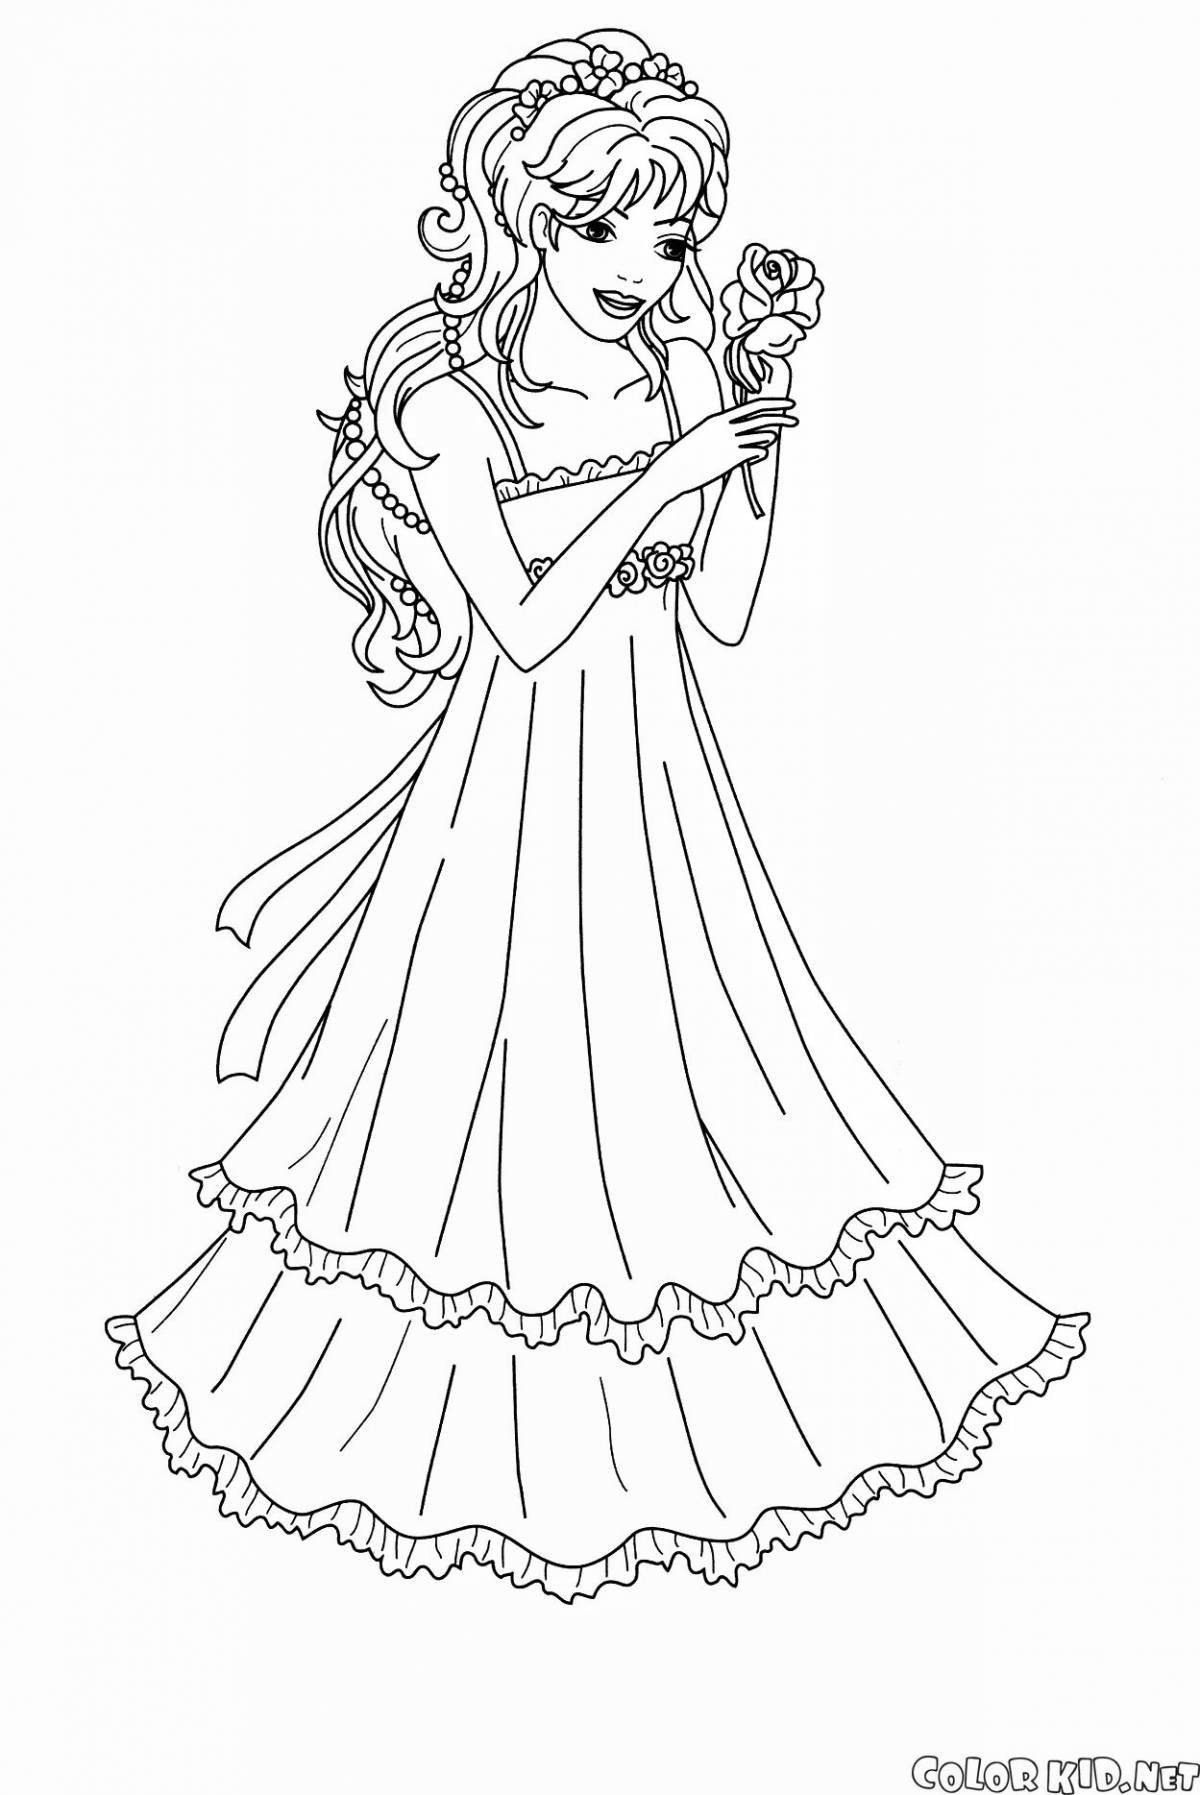 Majestic coloring page dresses for dolls